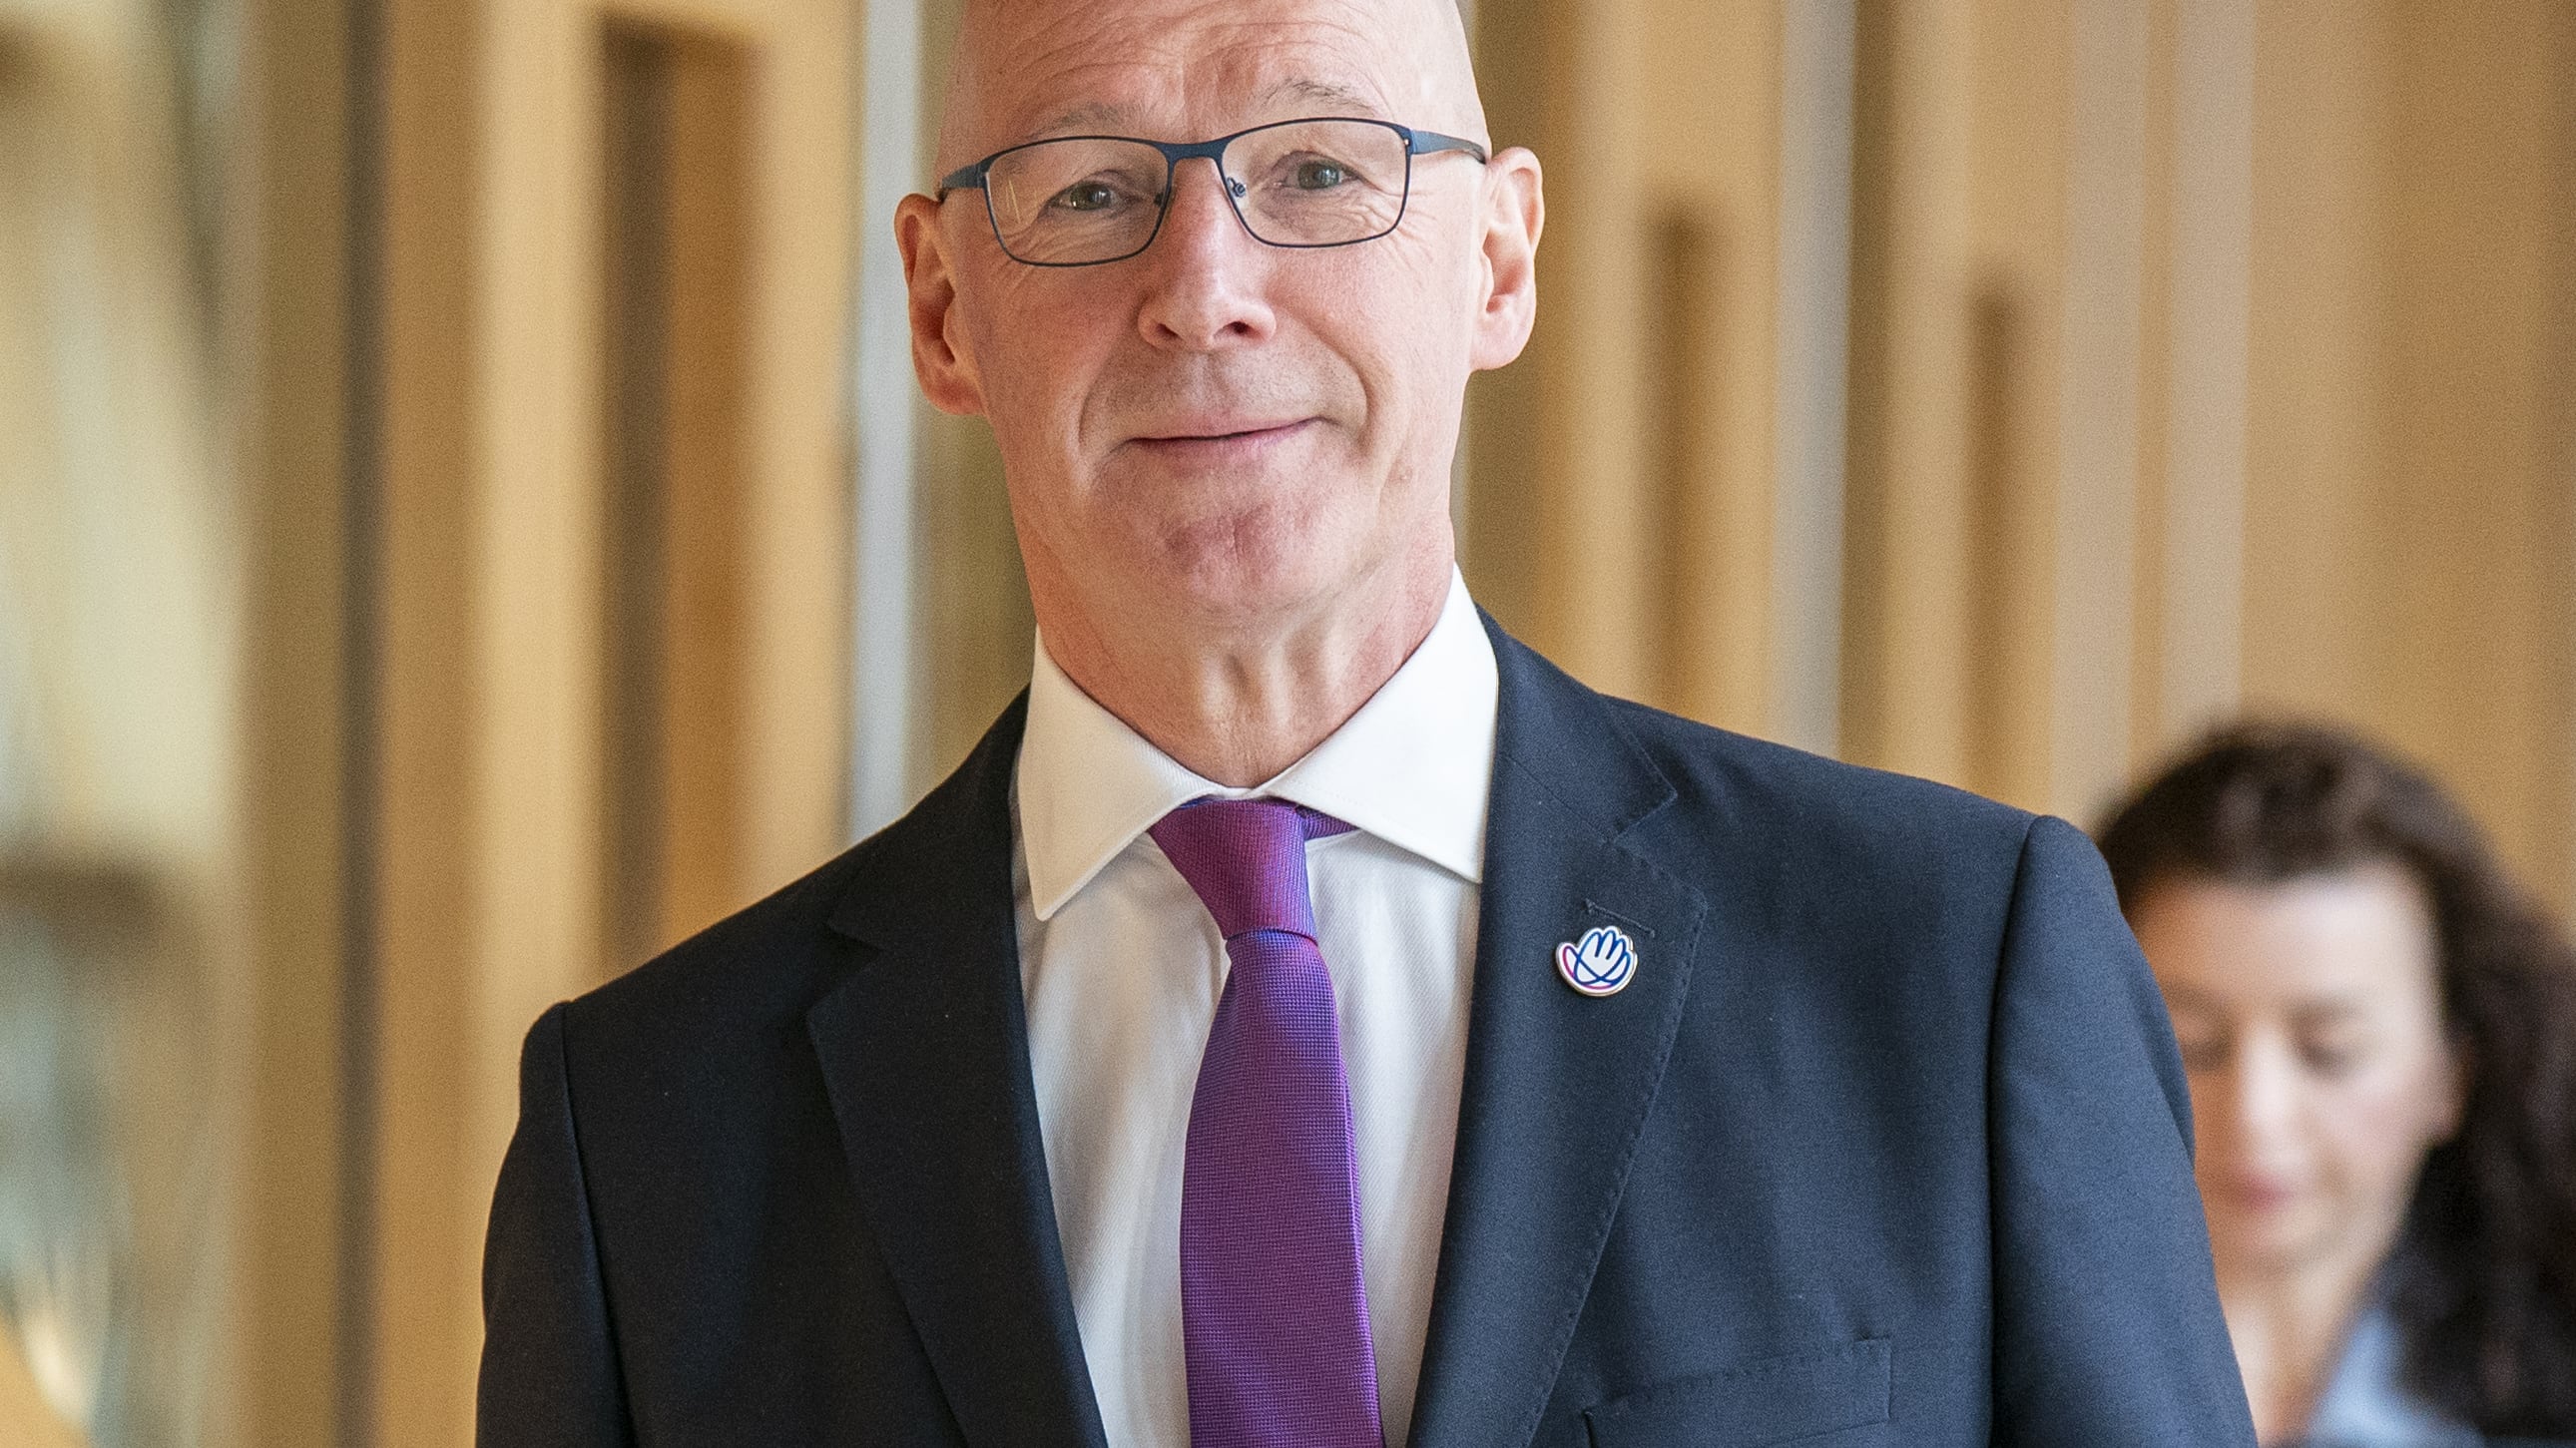 John Swinney wrote to the Prime Minister on Tuesday